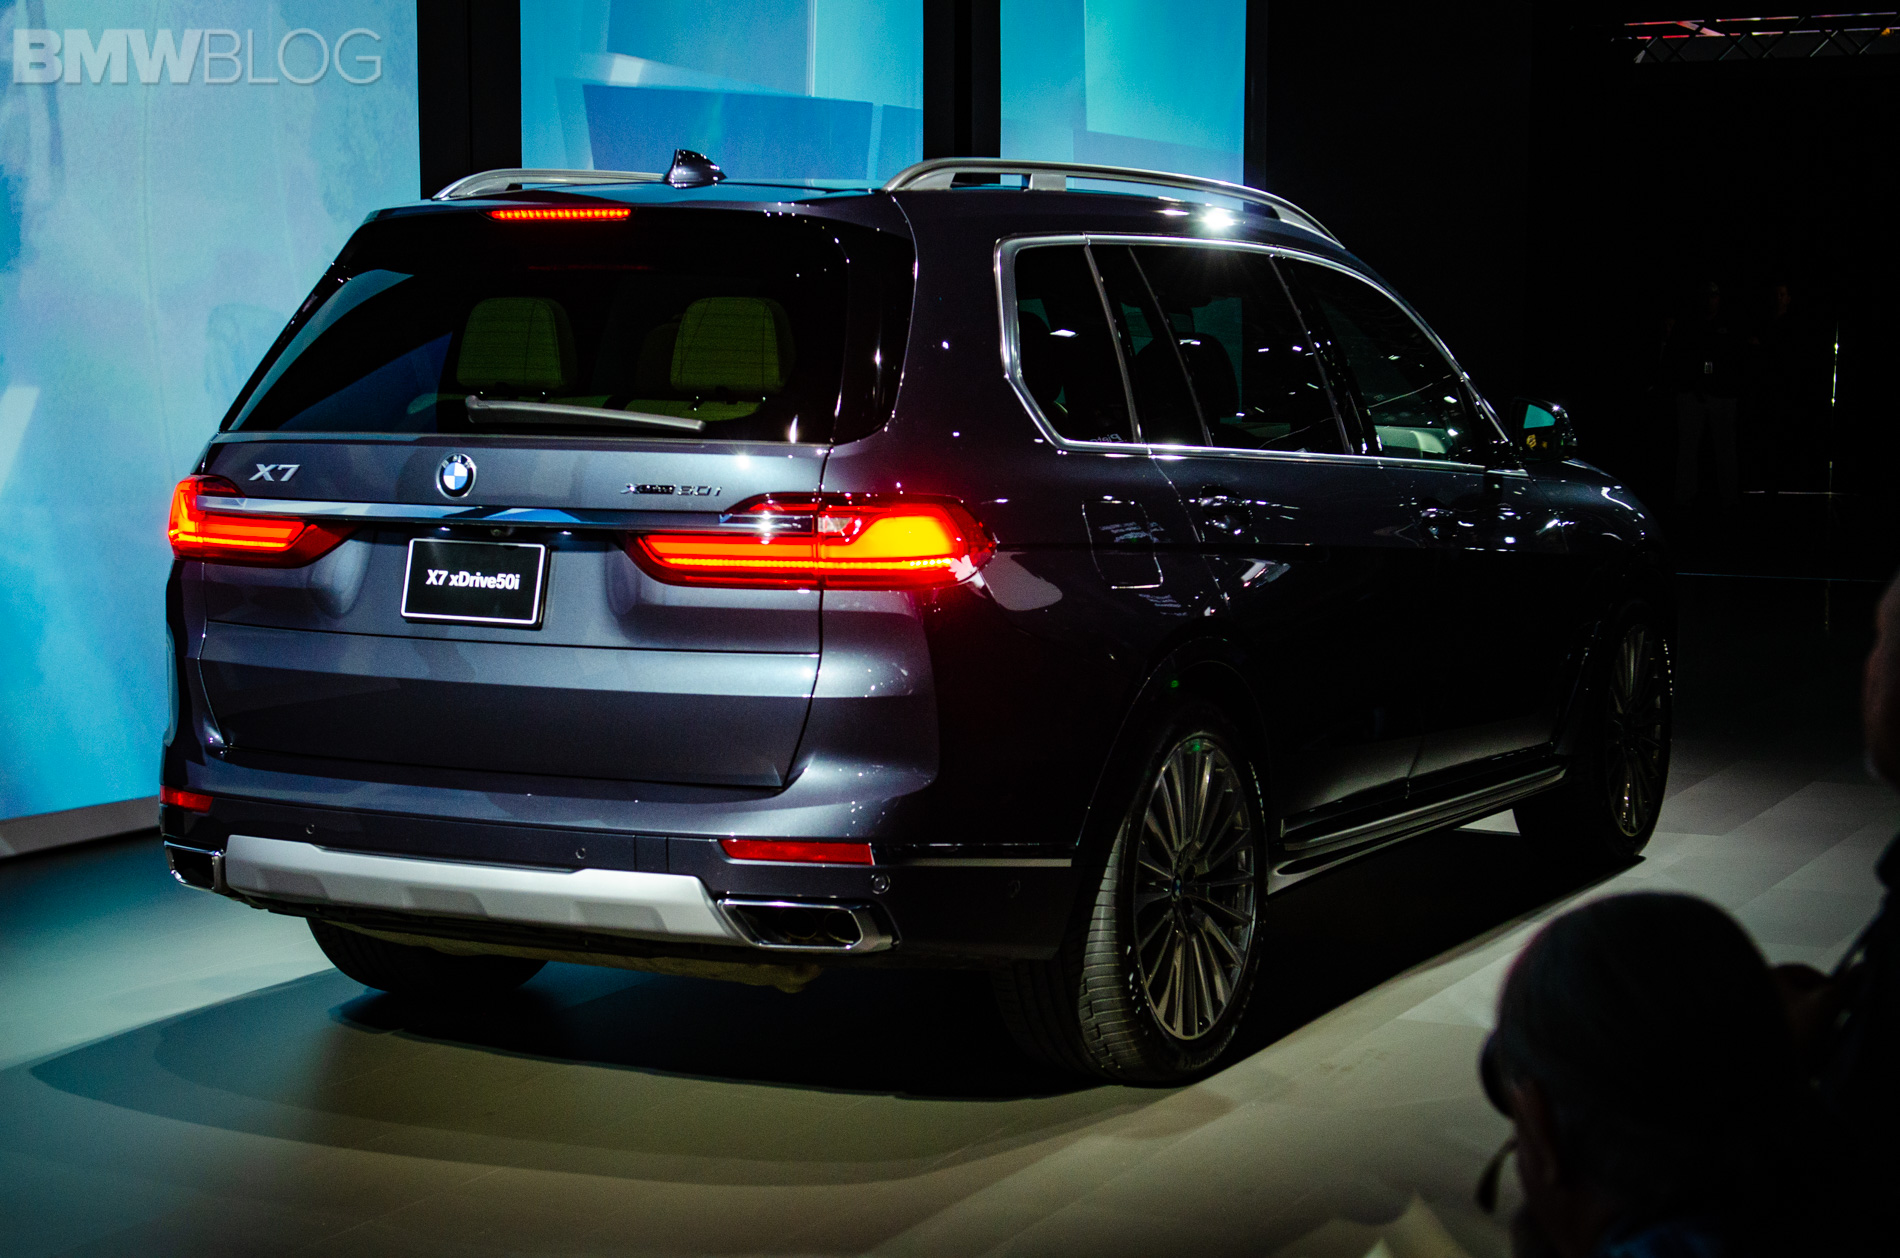 Video The New Bmw X7 And A Demo Of Third Row Seating